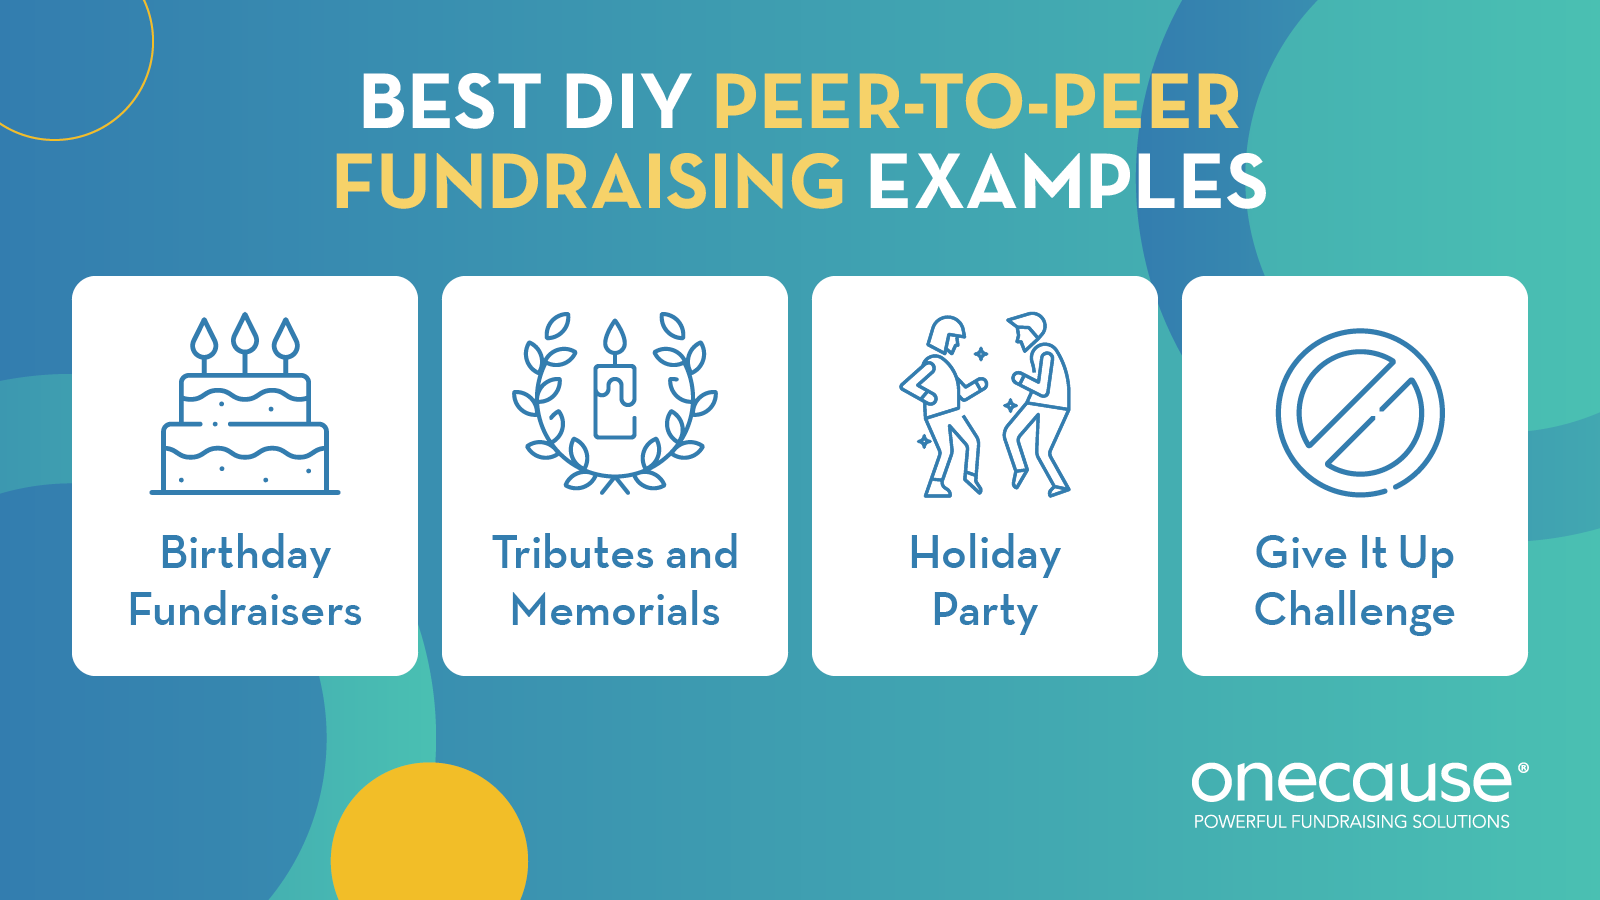 This image lists the best DIY peer-to-peer fundraising ideas, also covered in the text below.